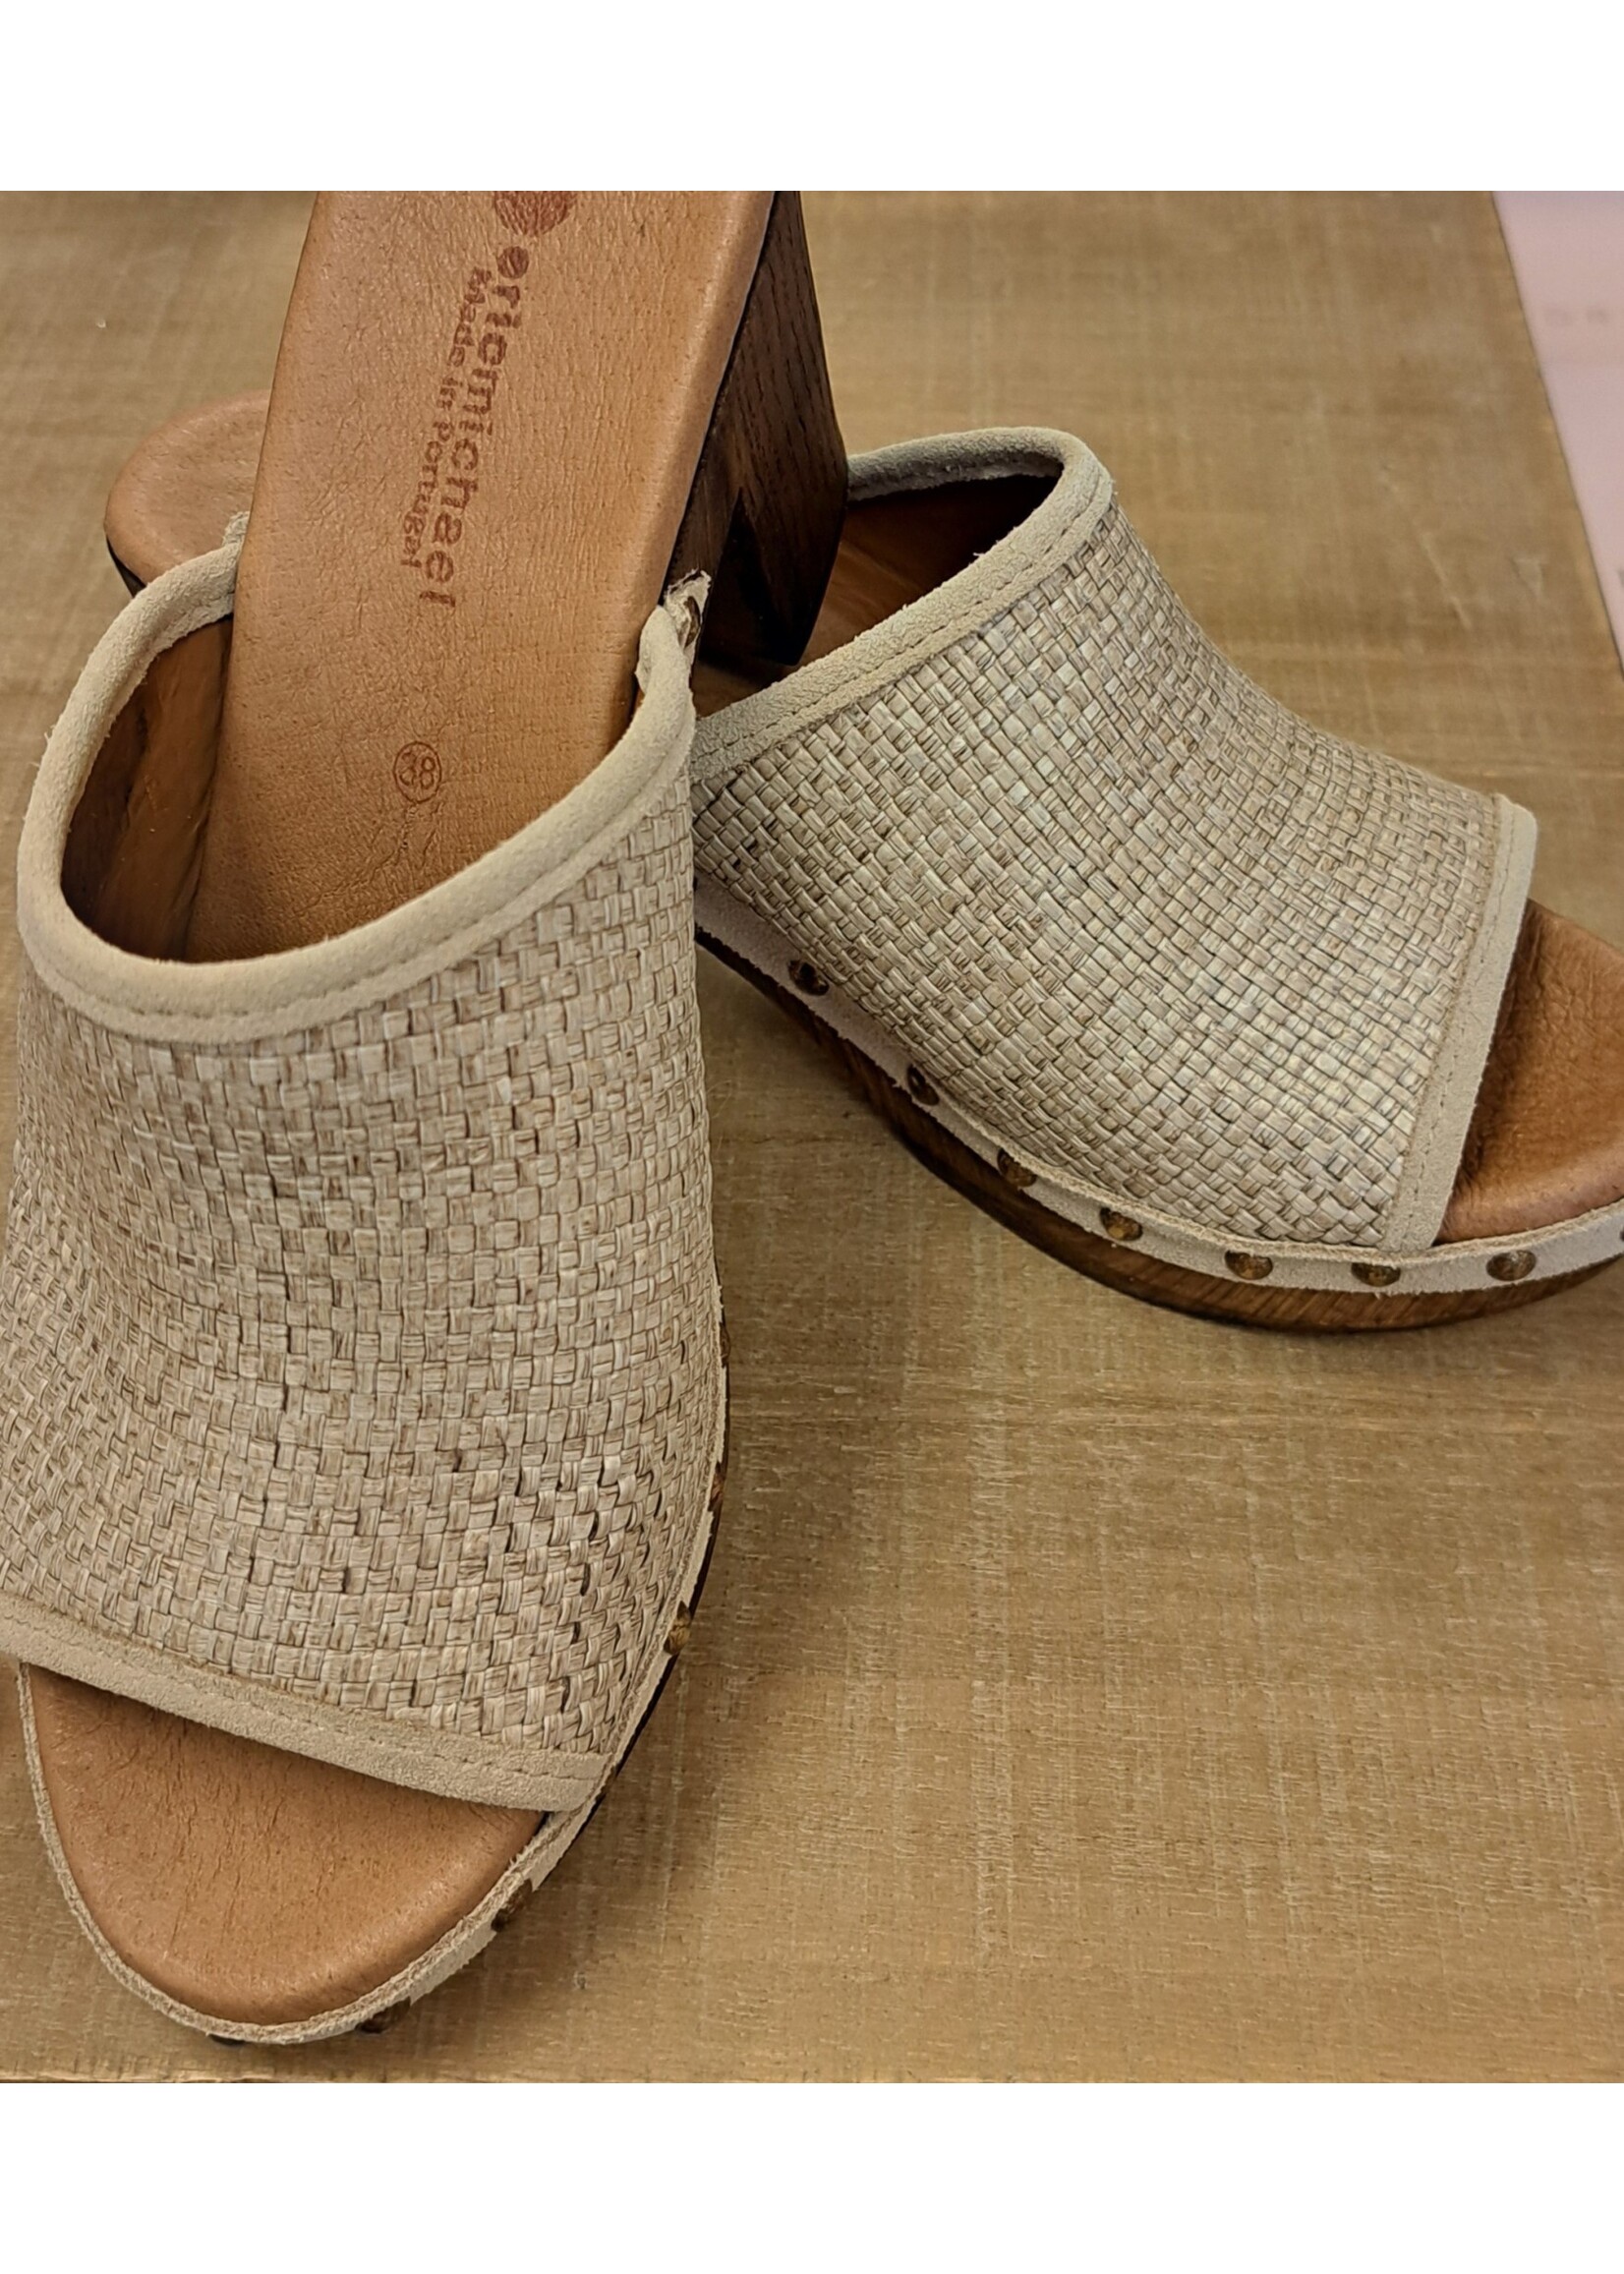 Cortney Slide in Taupe Raffia by Eric Michael